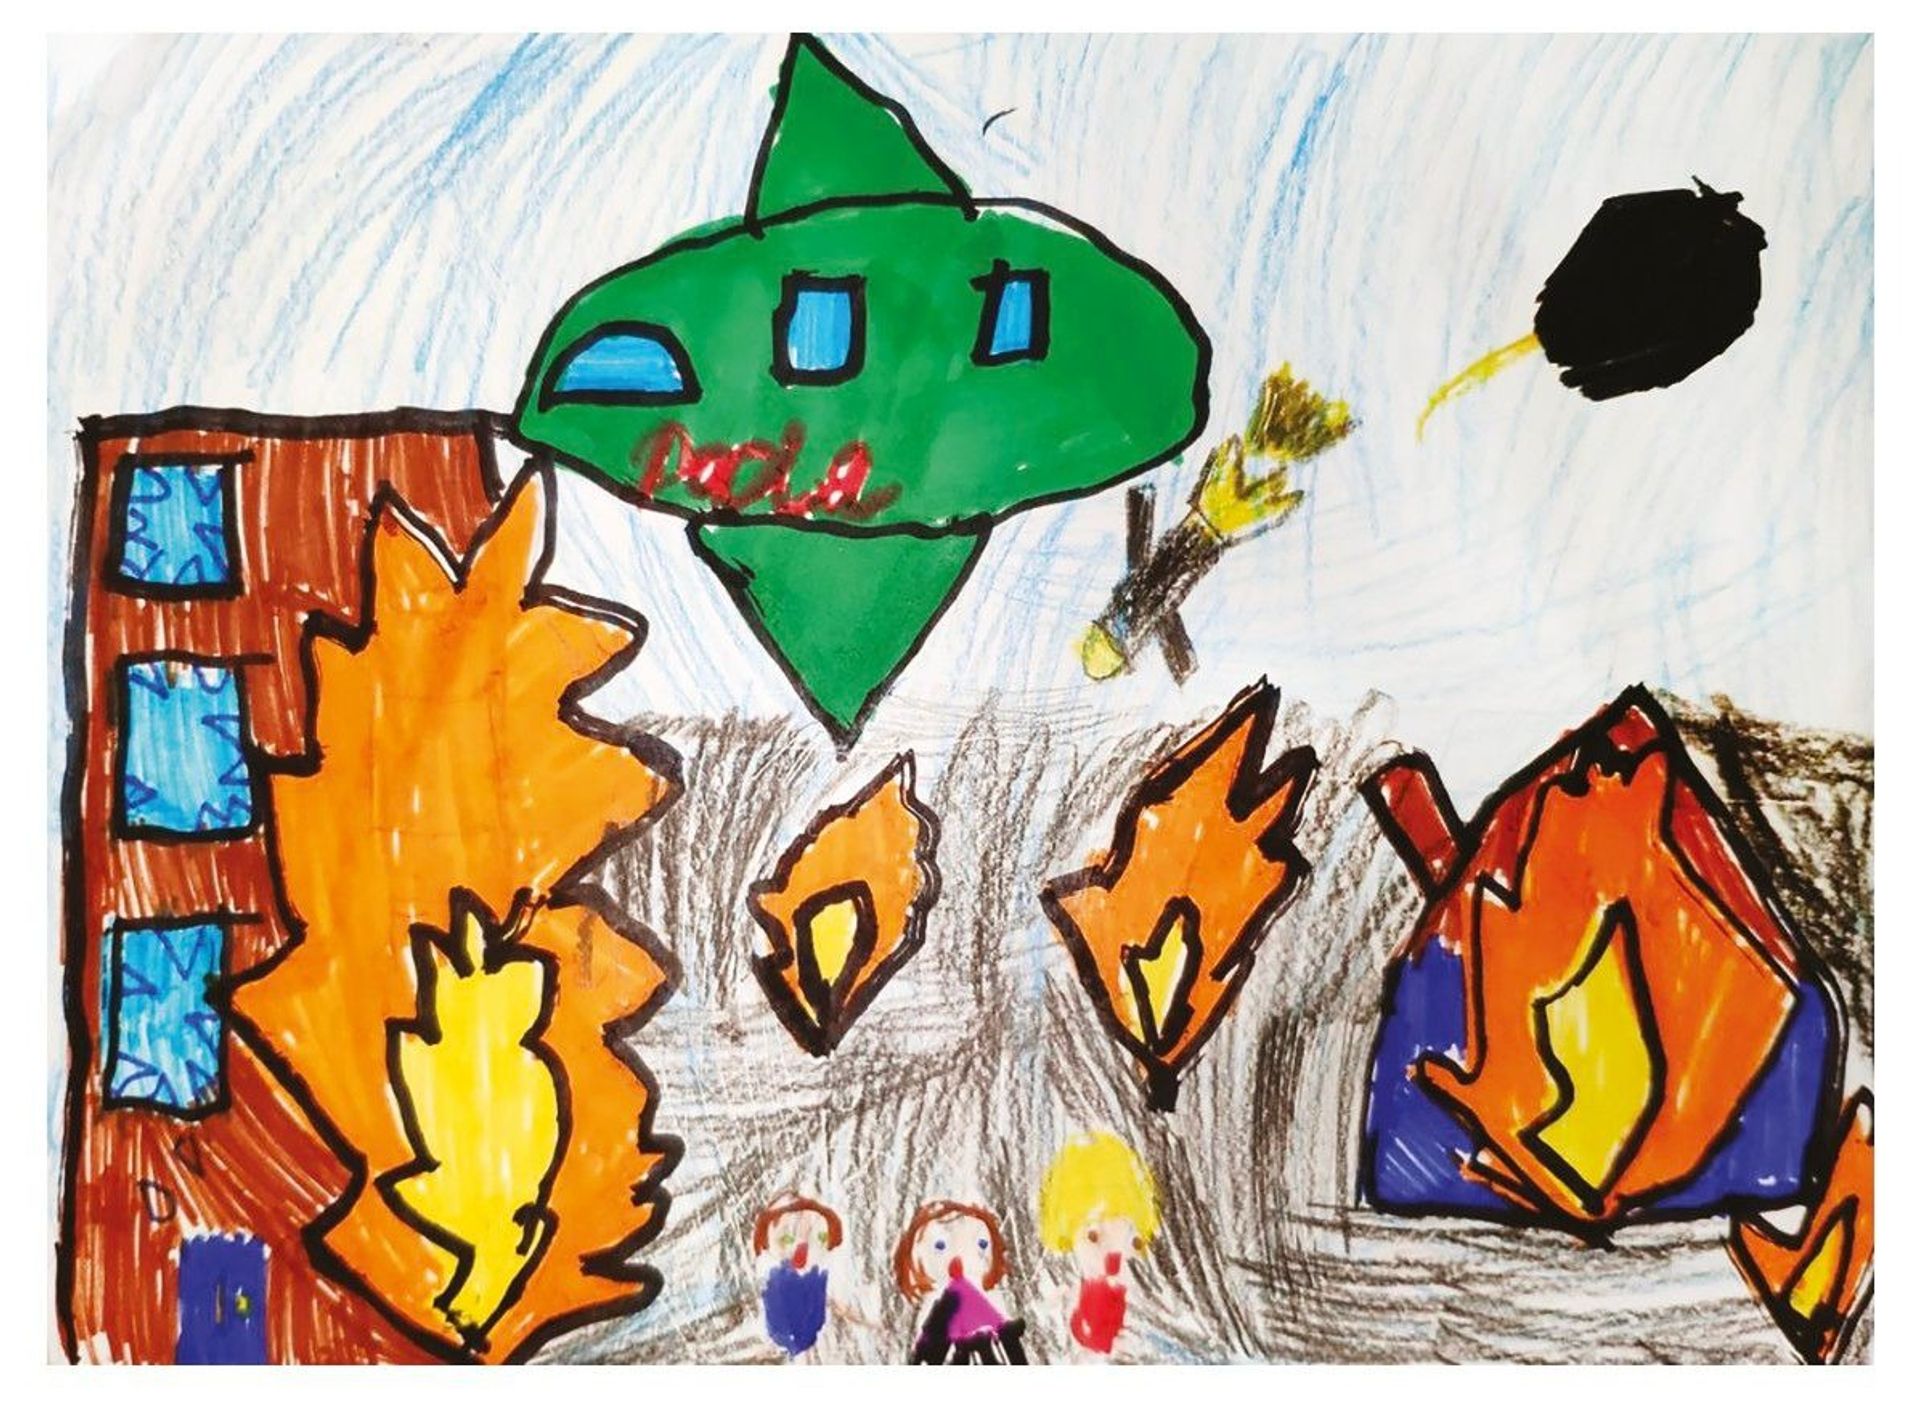 Drawing of the war in Ukraine by Daria, 9, from Kharkiv Courtesy of the "Mom, I See War" project